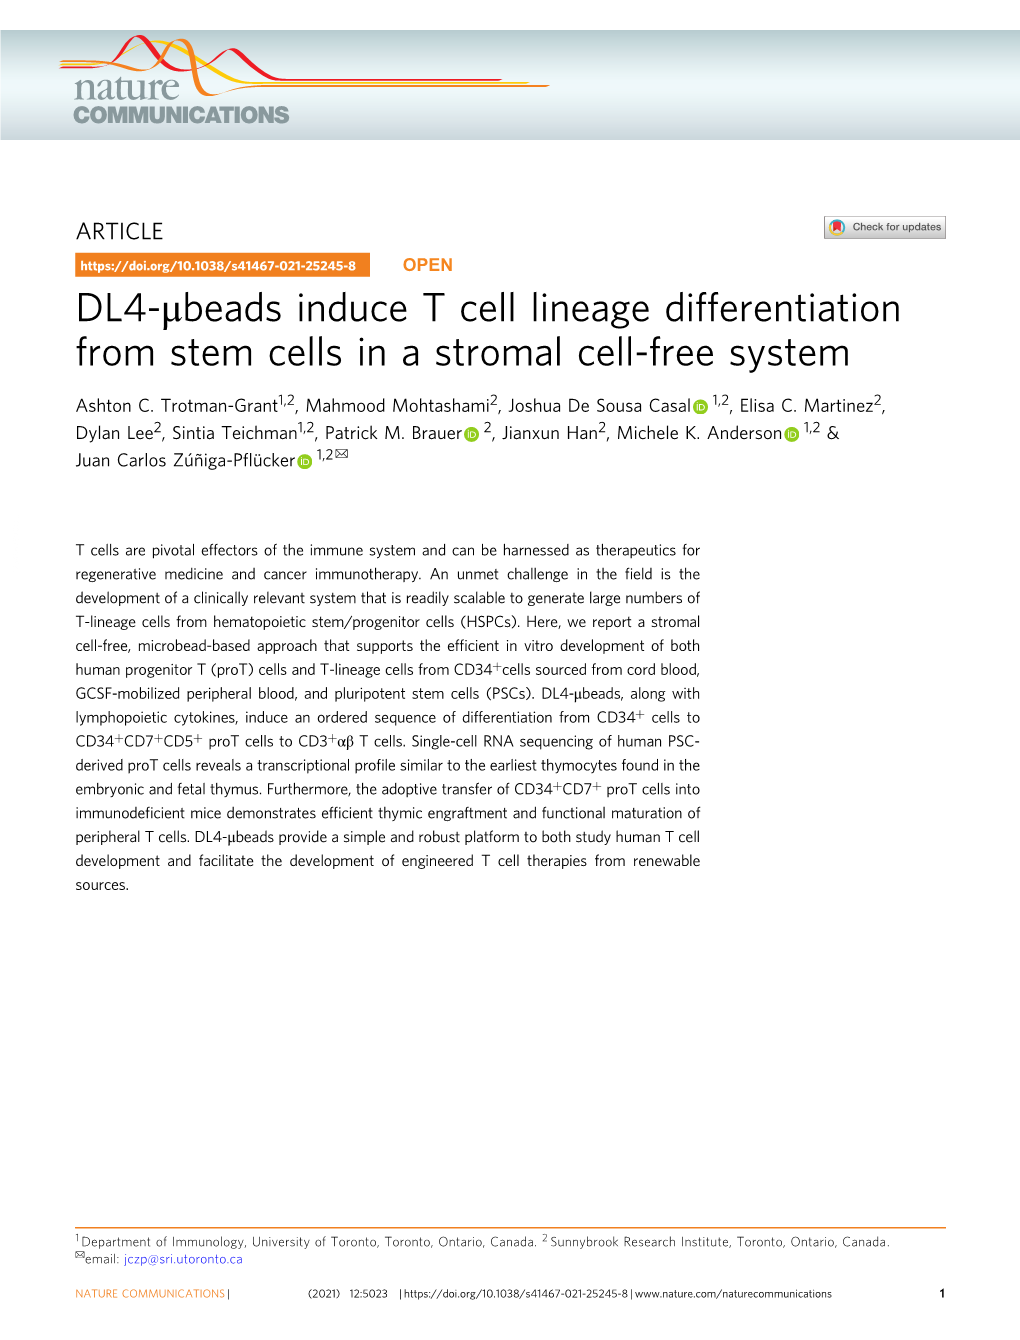 DL4-Î¼beads Induce T Cell Lineage Differentiation from Stem Cells in A